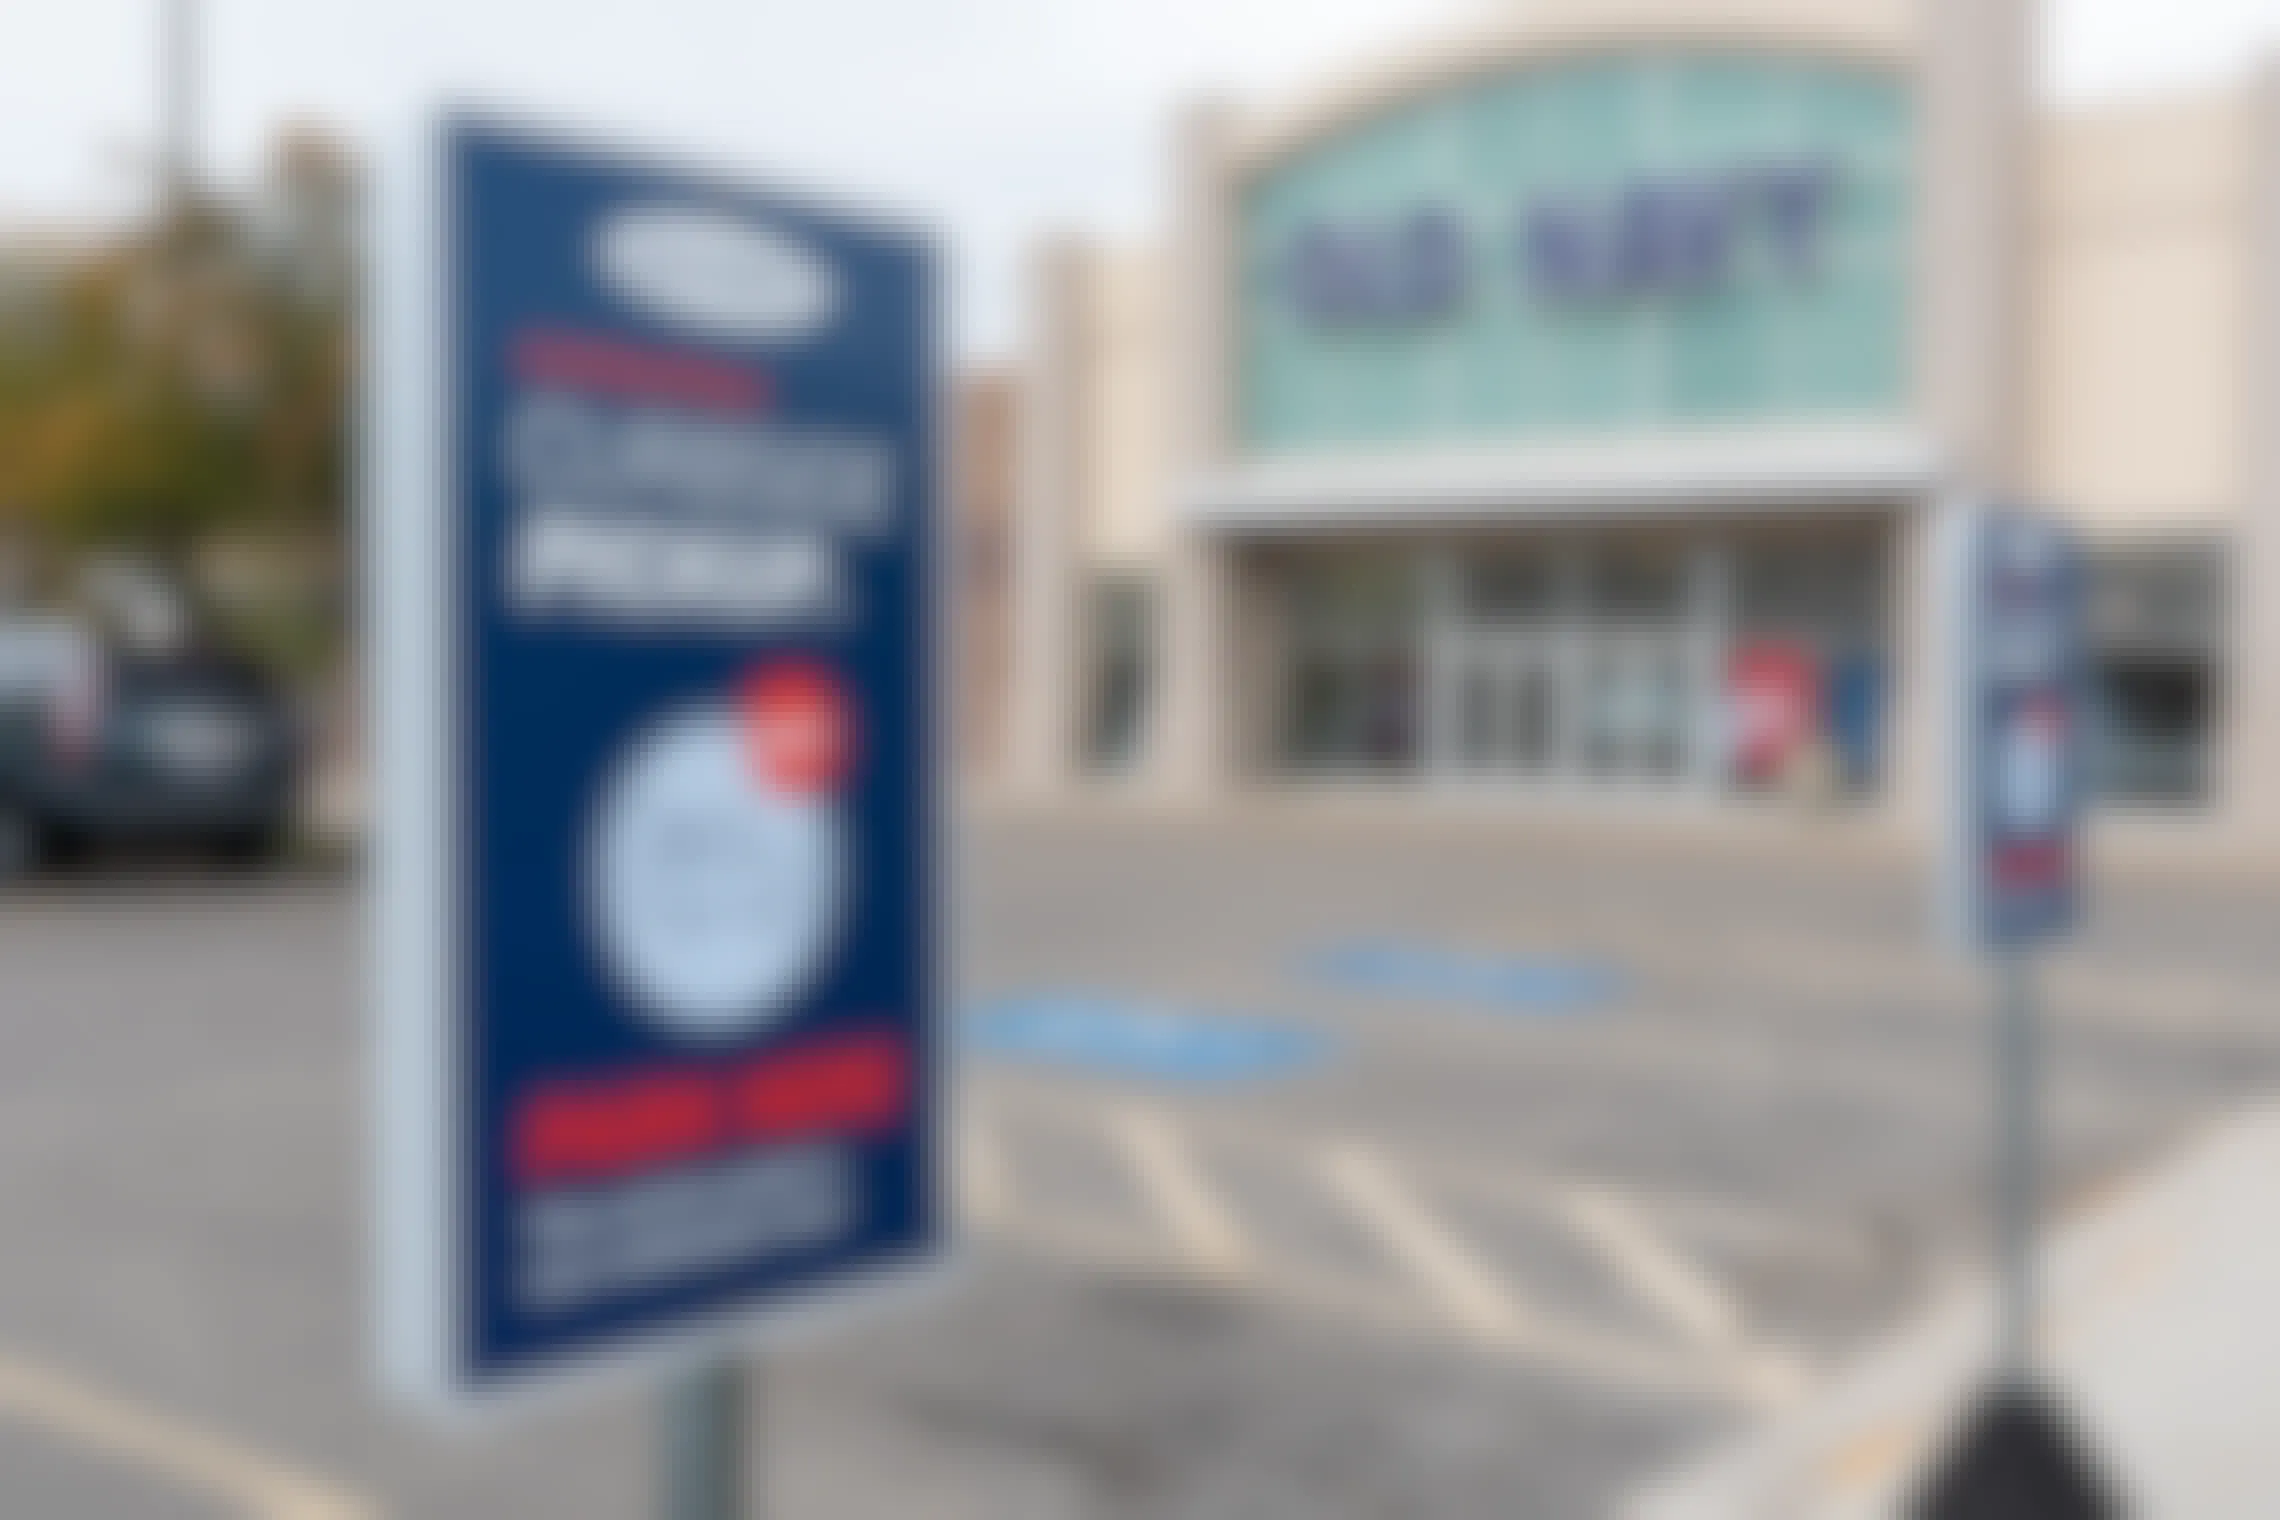 Old Navy store front with curbside pickup sign